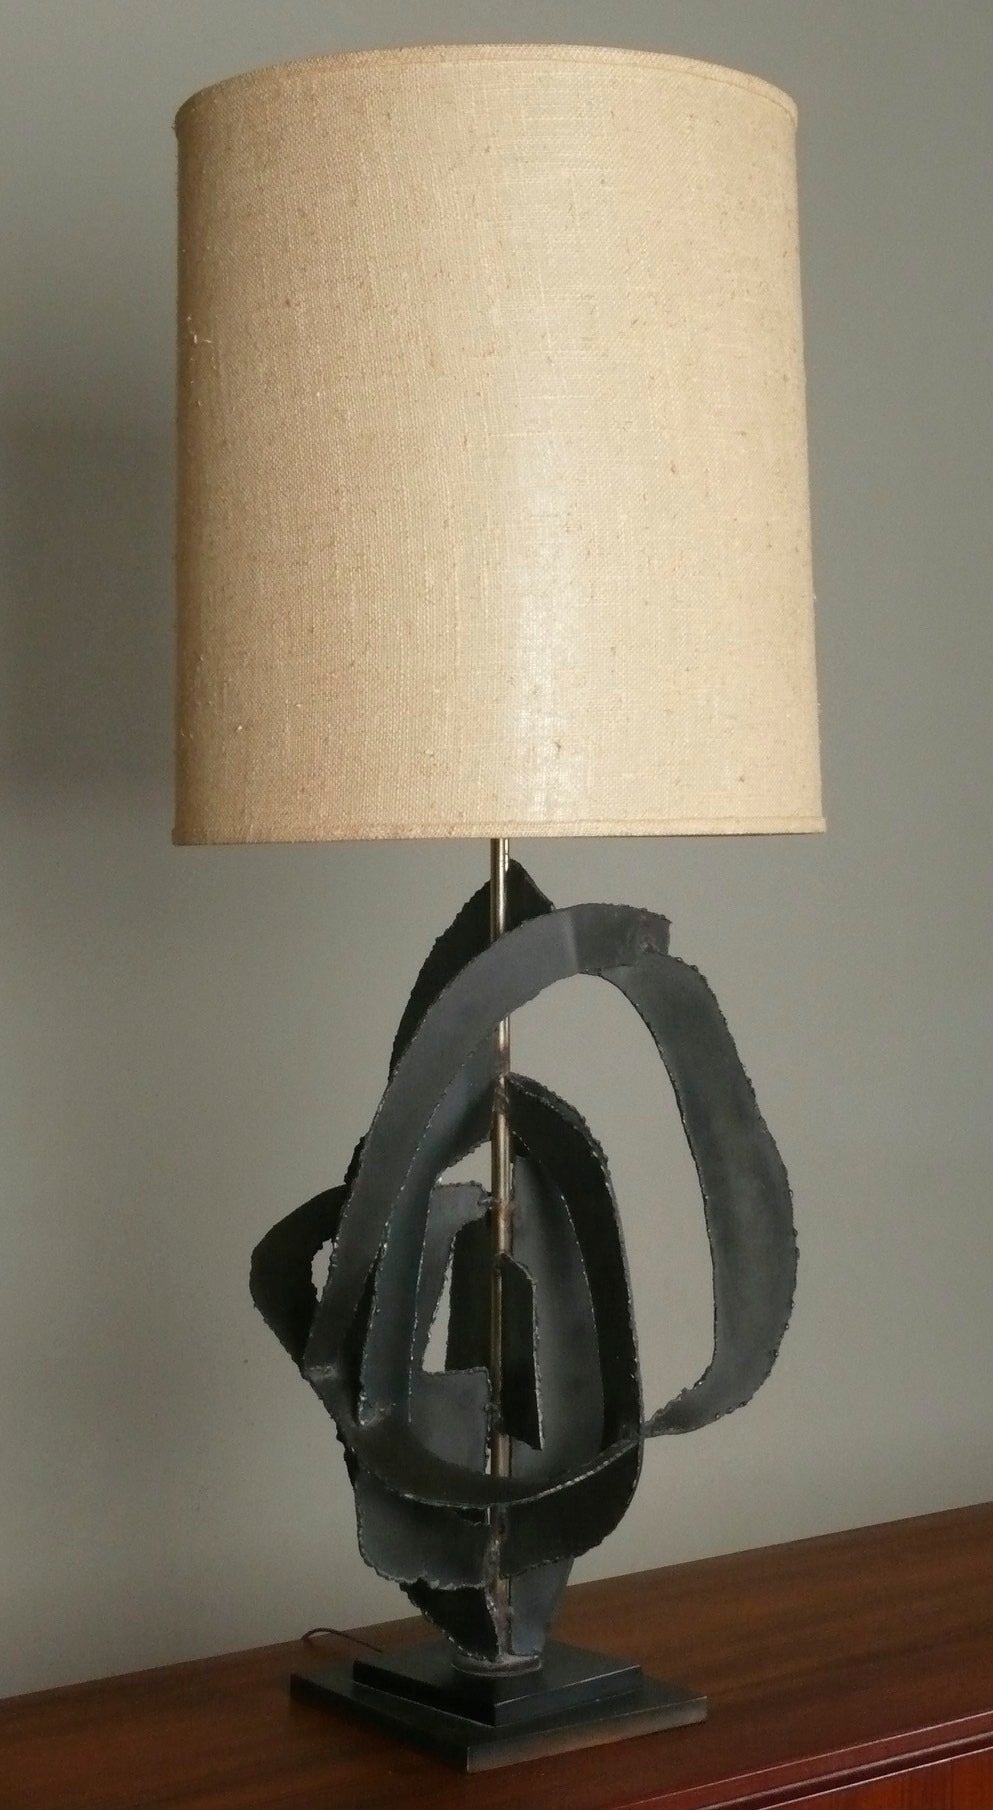 Torch-cut steel lamp designed by Harry Balmer for the Laurel Lamp Company. Shown with original shade (optional).